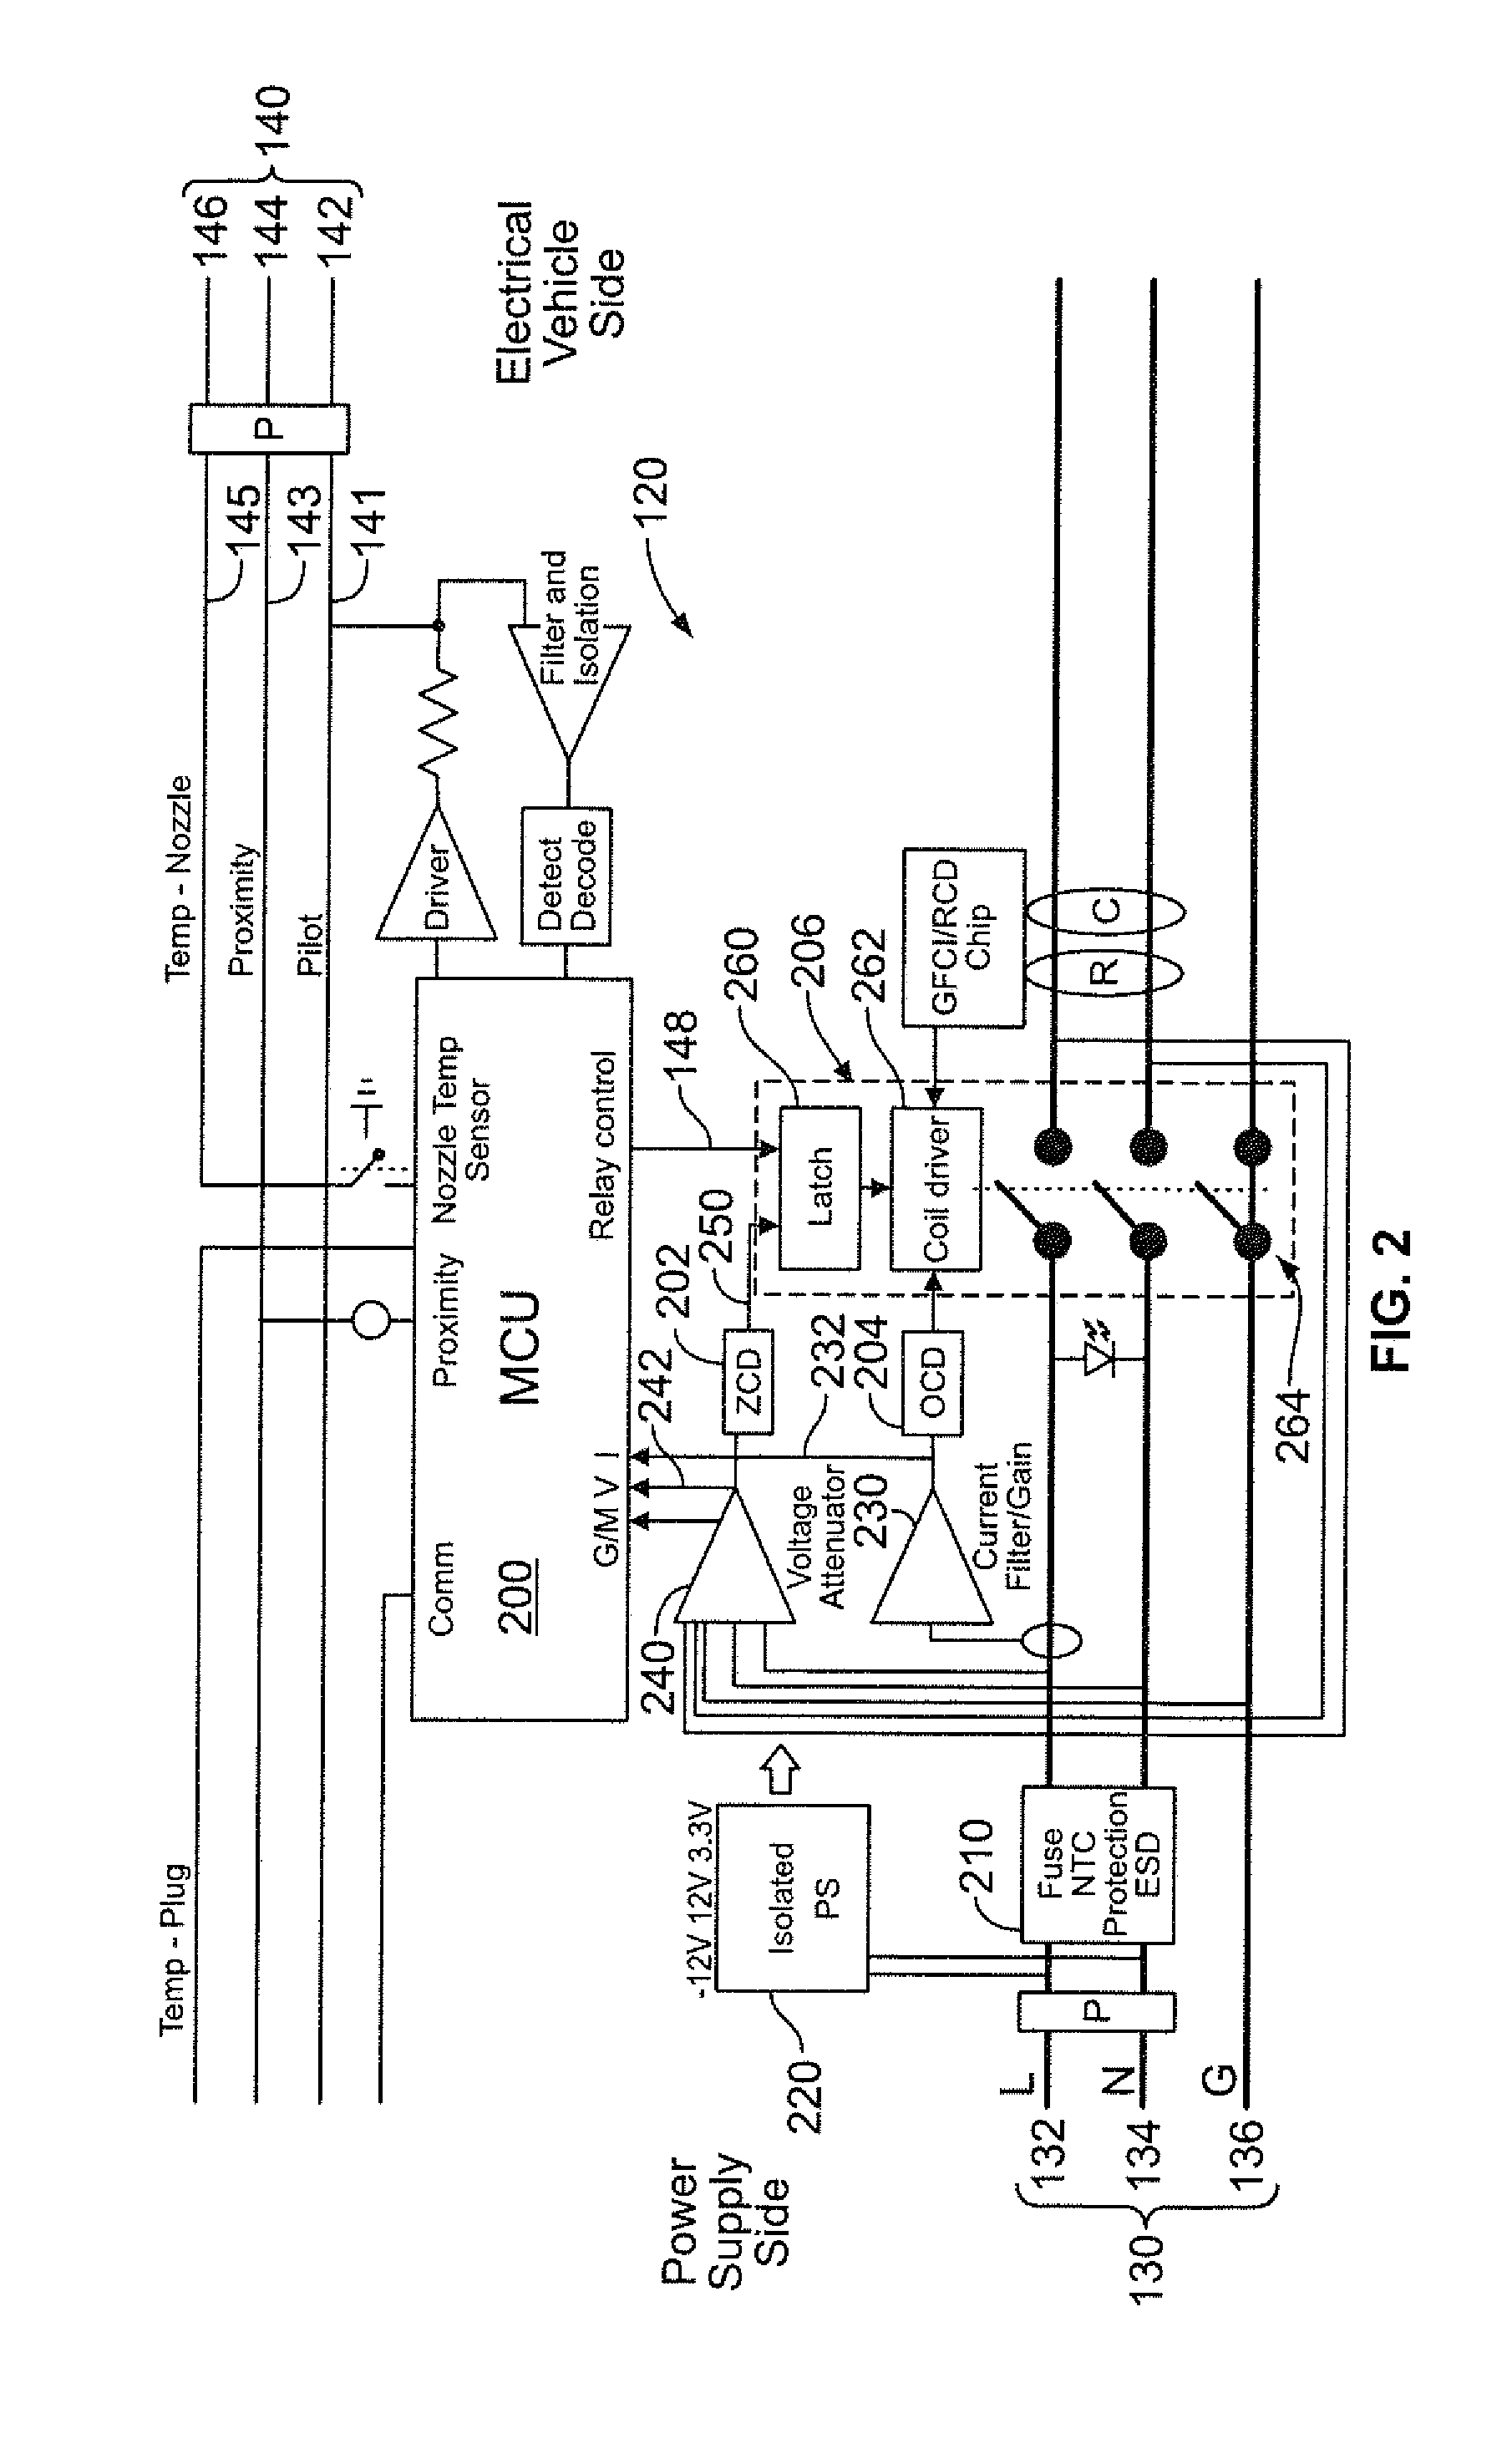 Electric vehicle support equipment having a smart plug with a relay control circuit